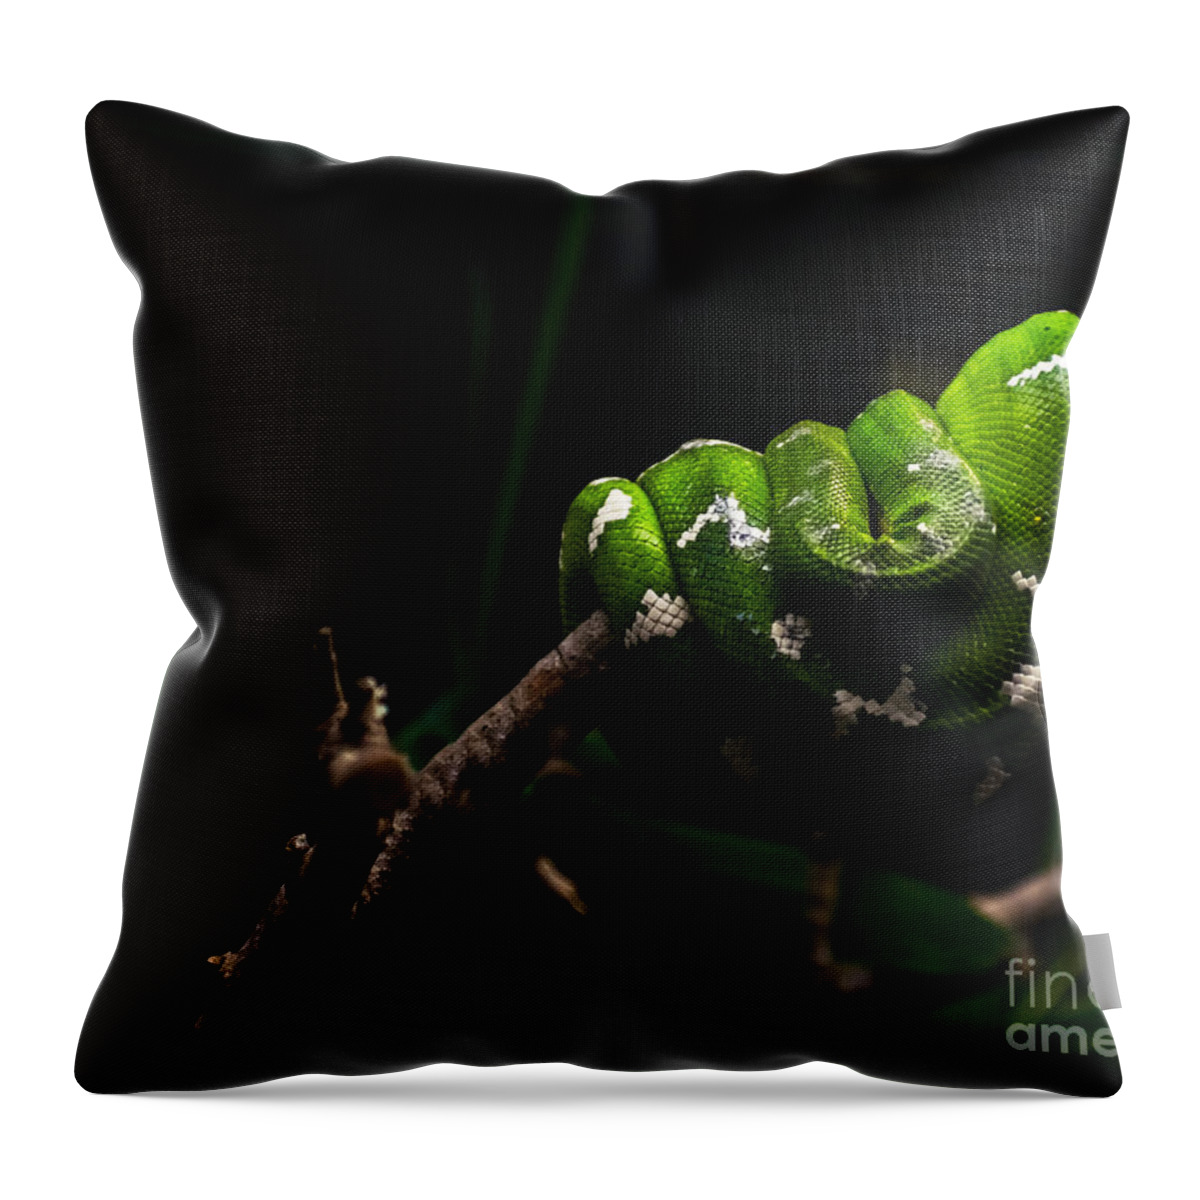 Emerald Tree Boa Throw Pillow featuring the photograph Emerald Tree Boa by Imagery by Charly